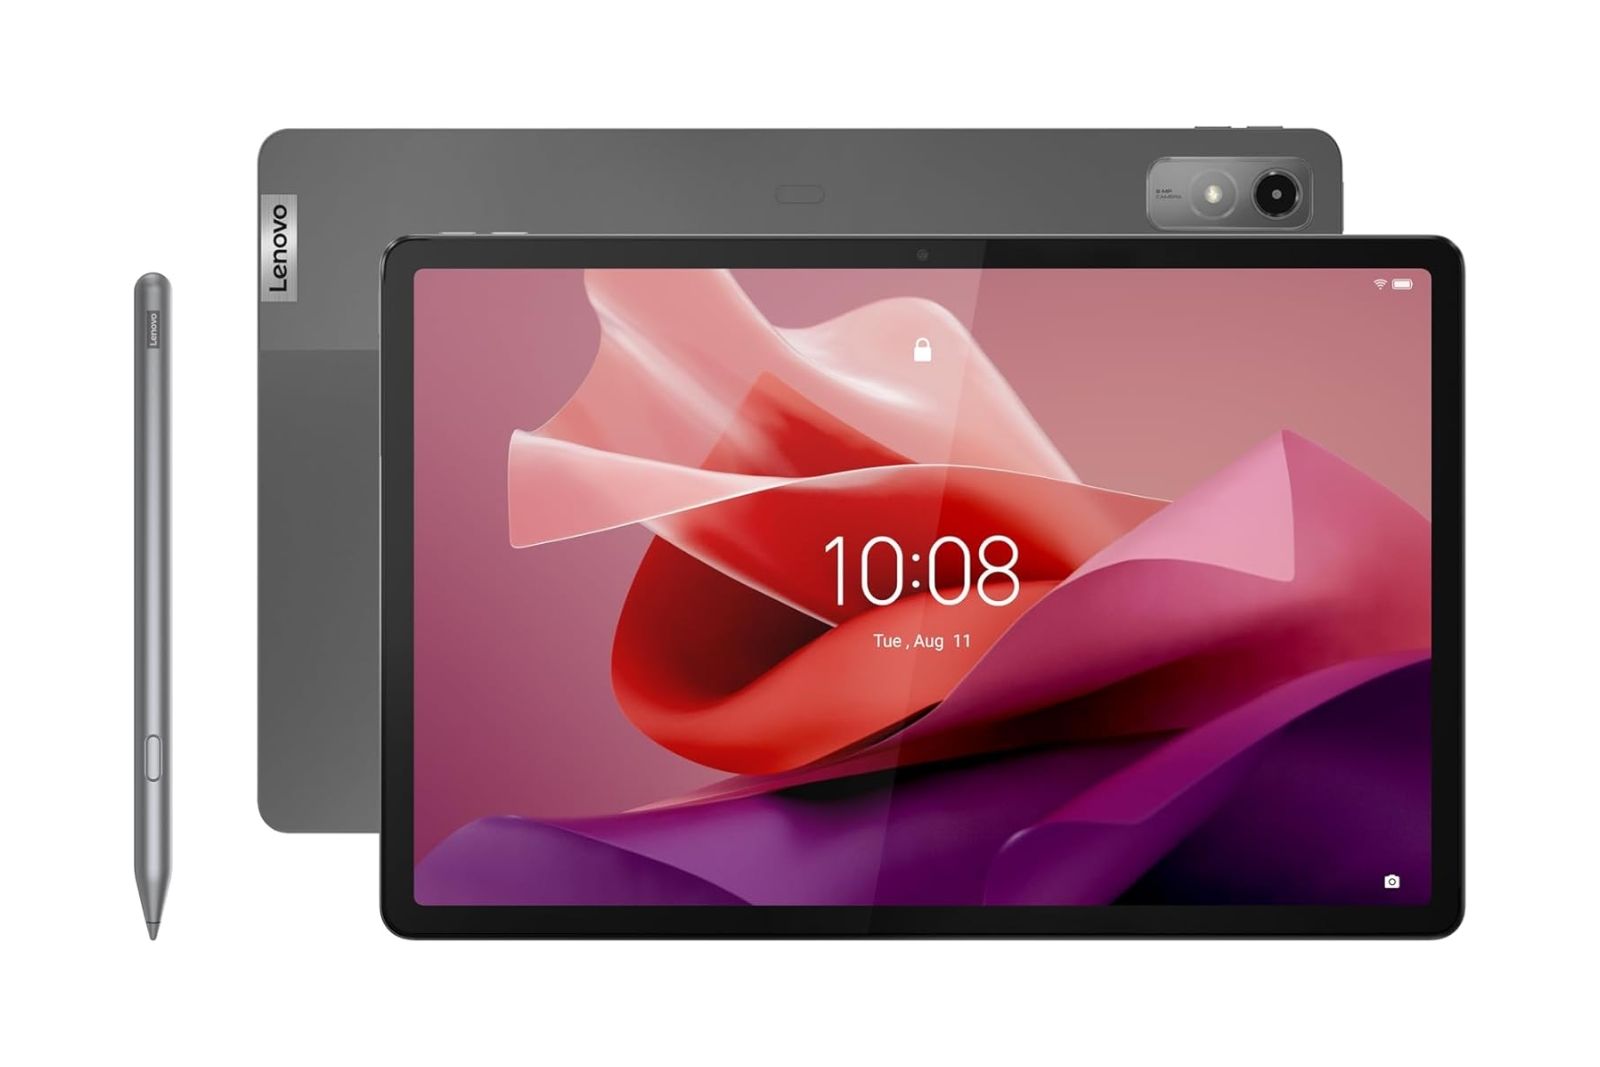 A large grey tablet in front of another tablet, with a stylus to the left.